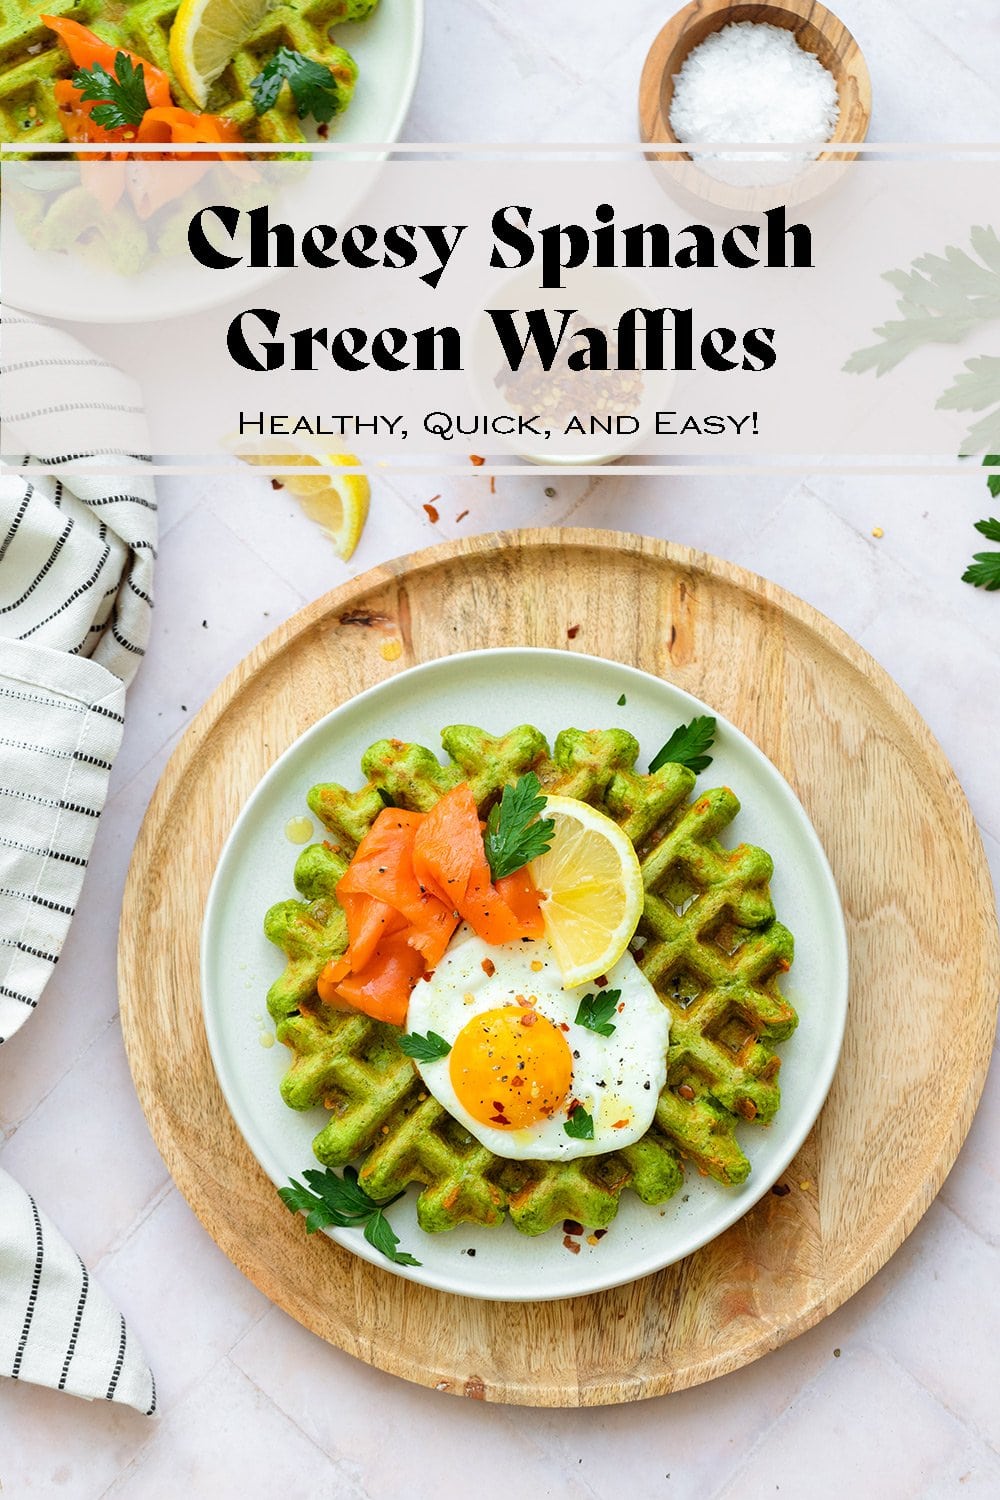 Savory Green Waffles with Spinach